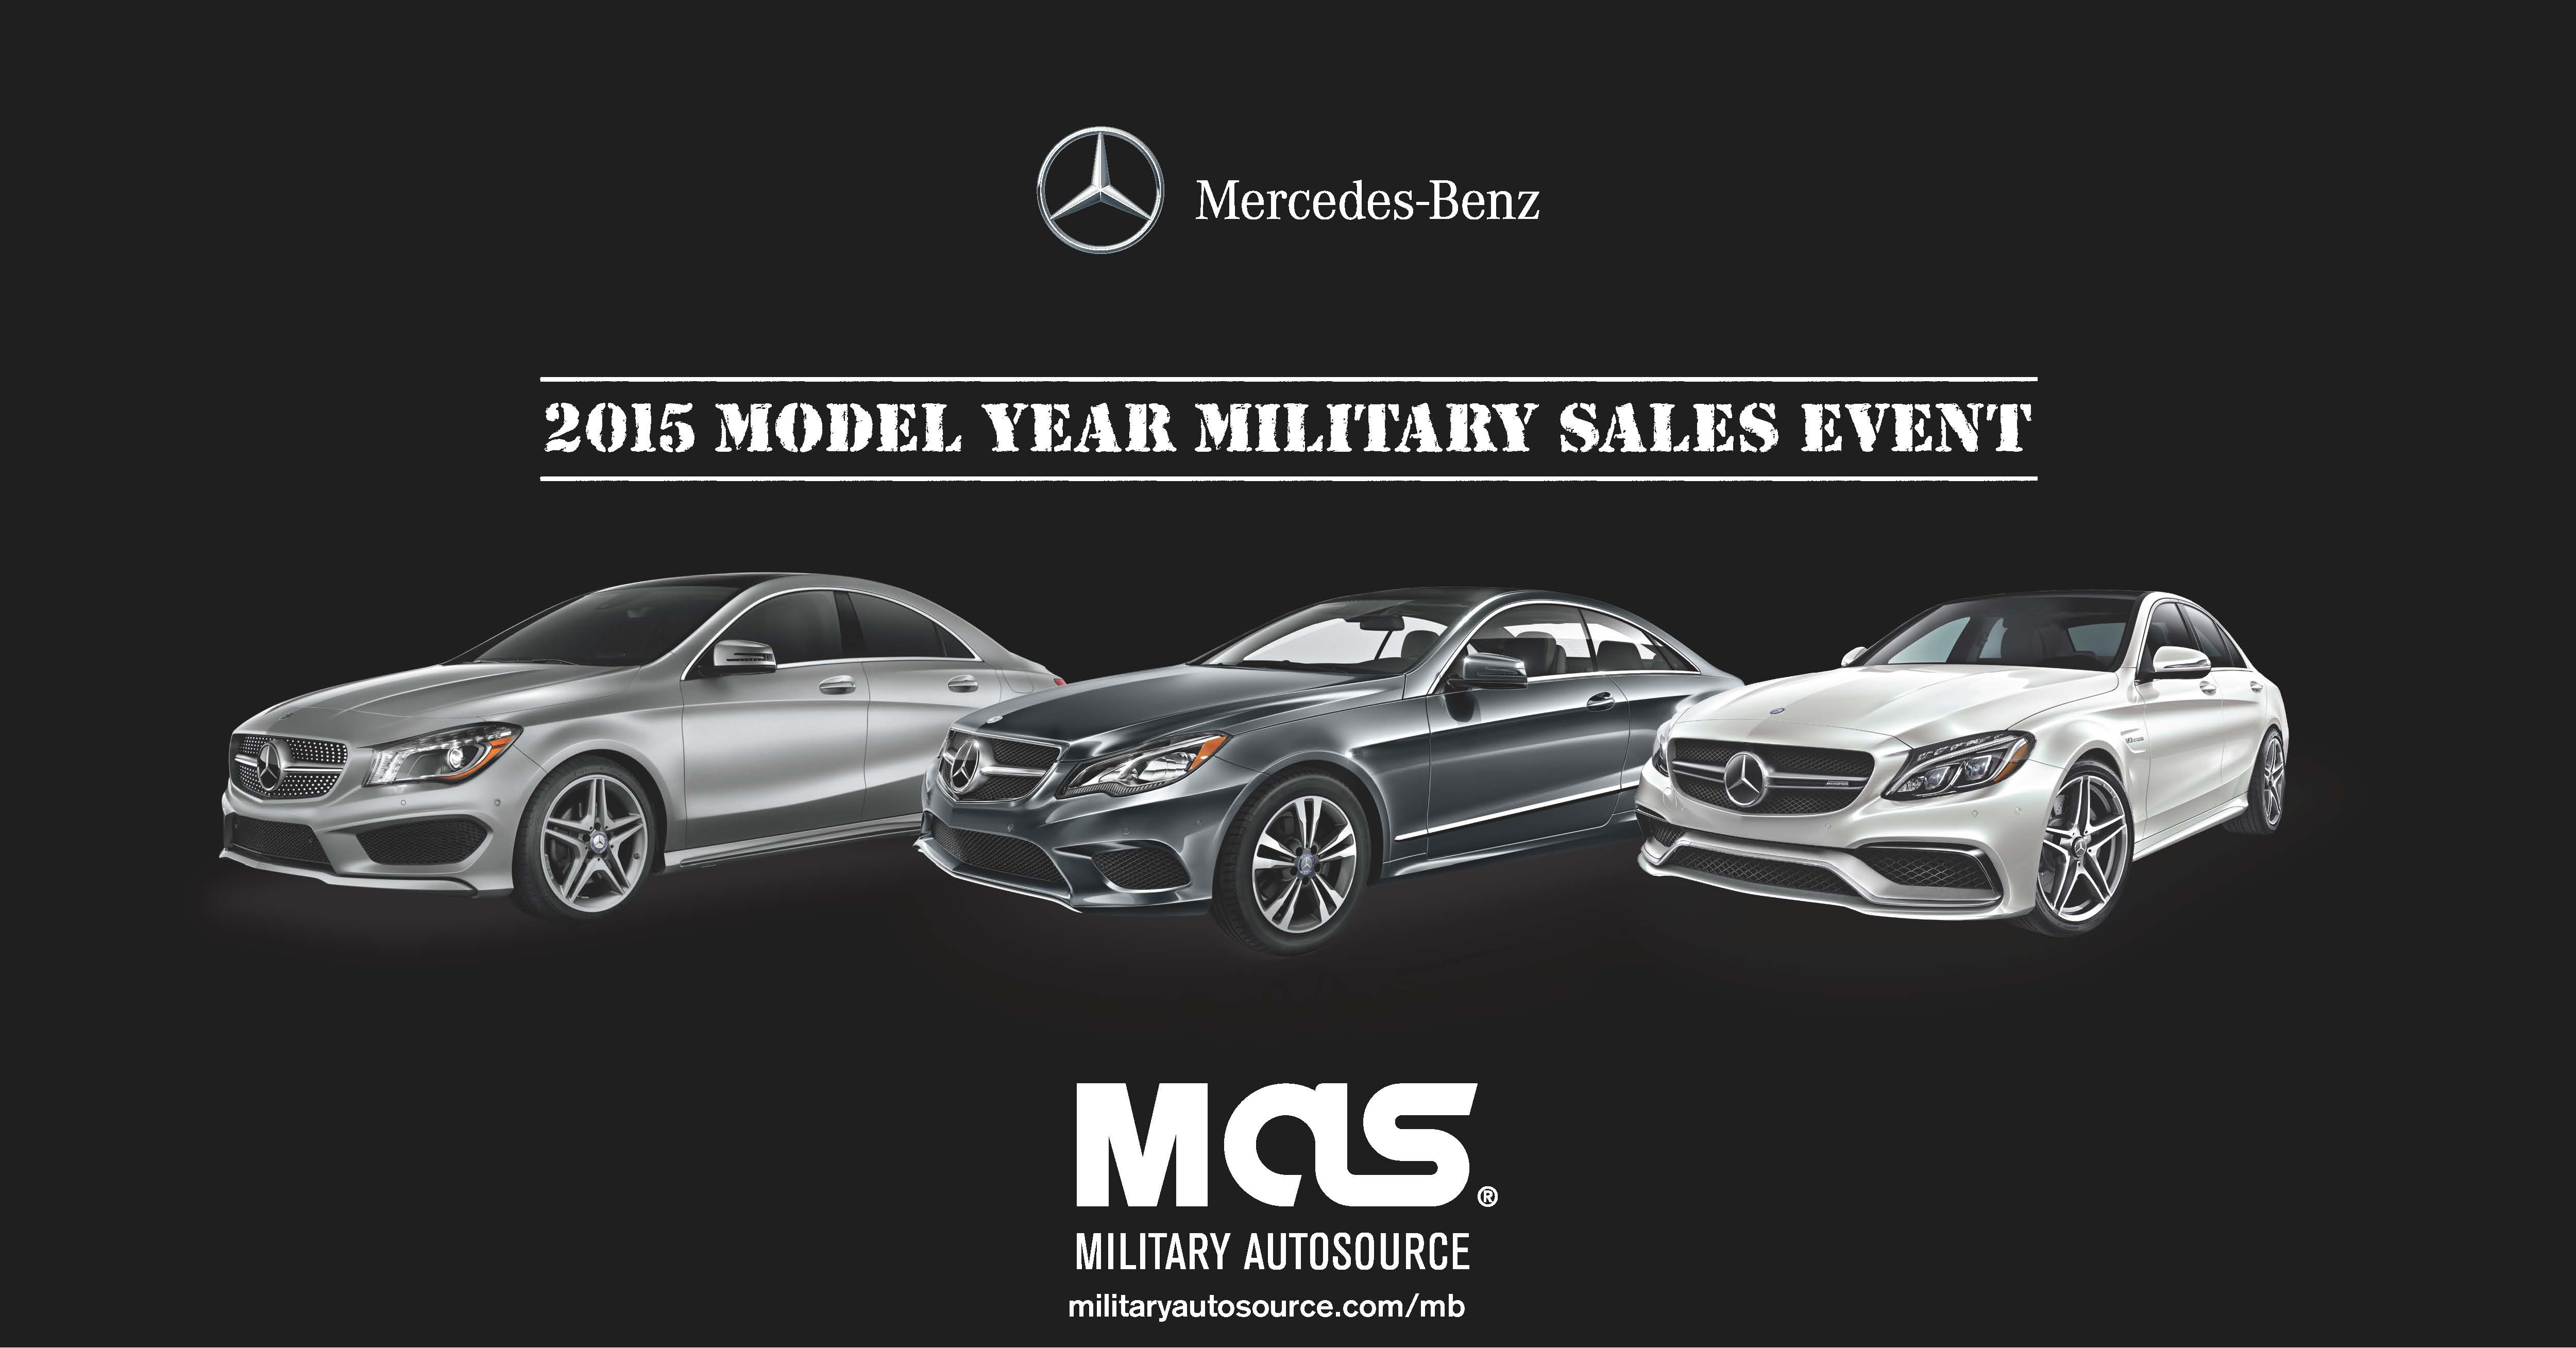 MB Military Sales Event